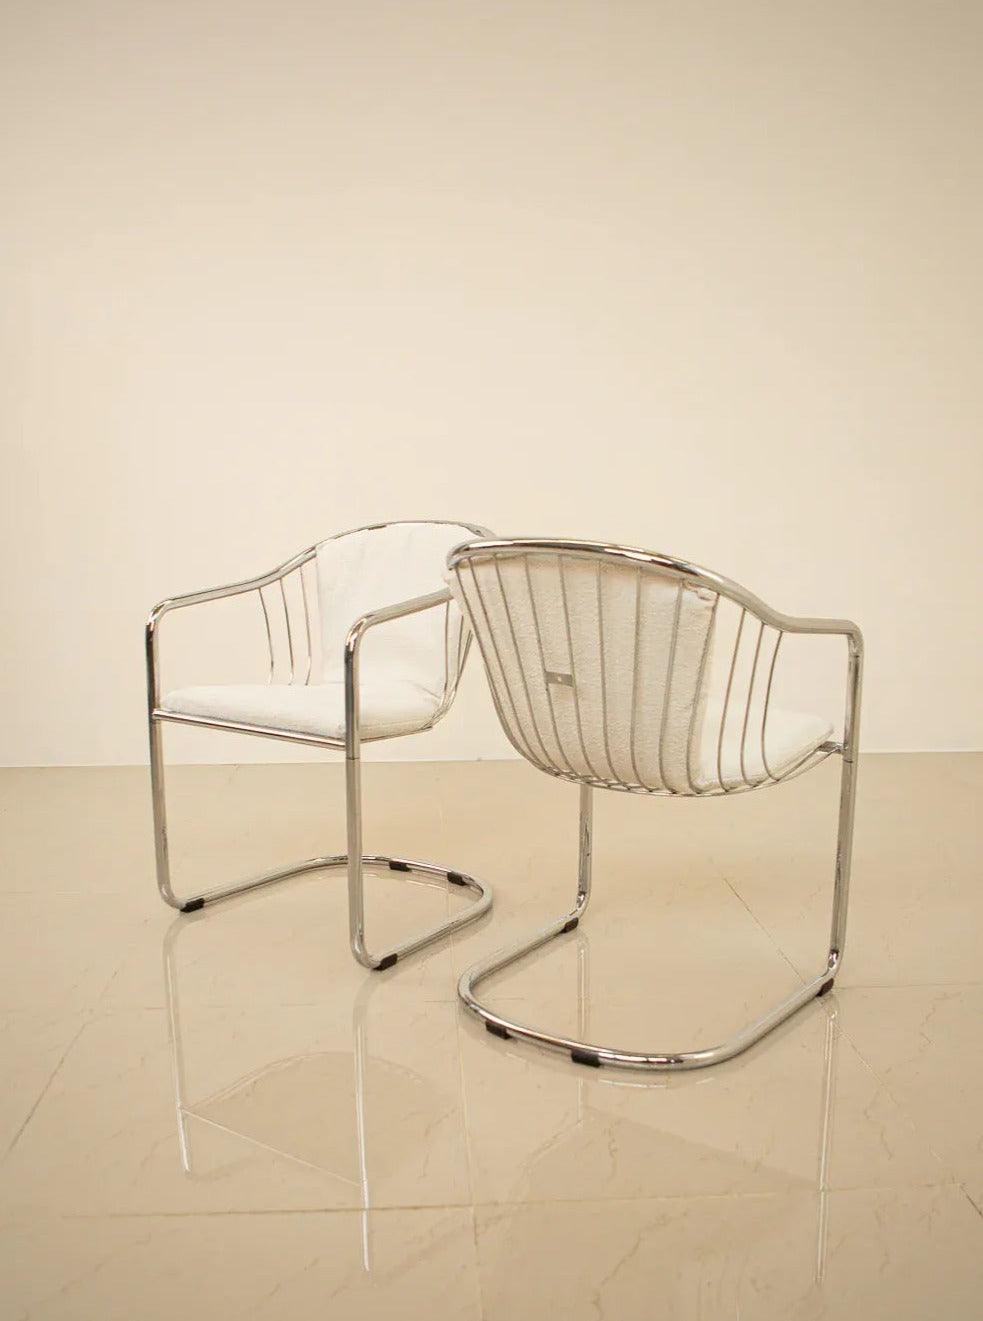 Pair of Chairs by Gastone Rinaldi 70's/80's